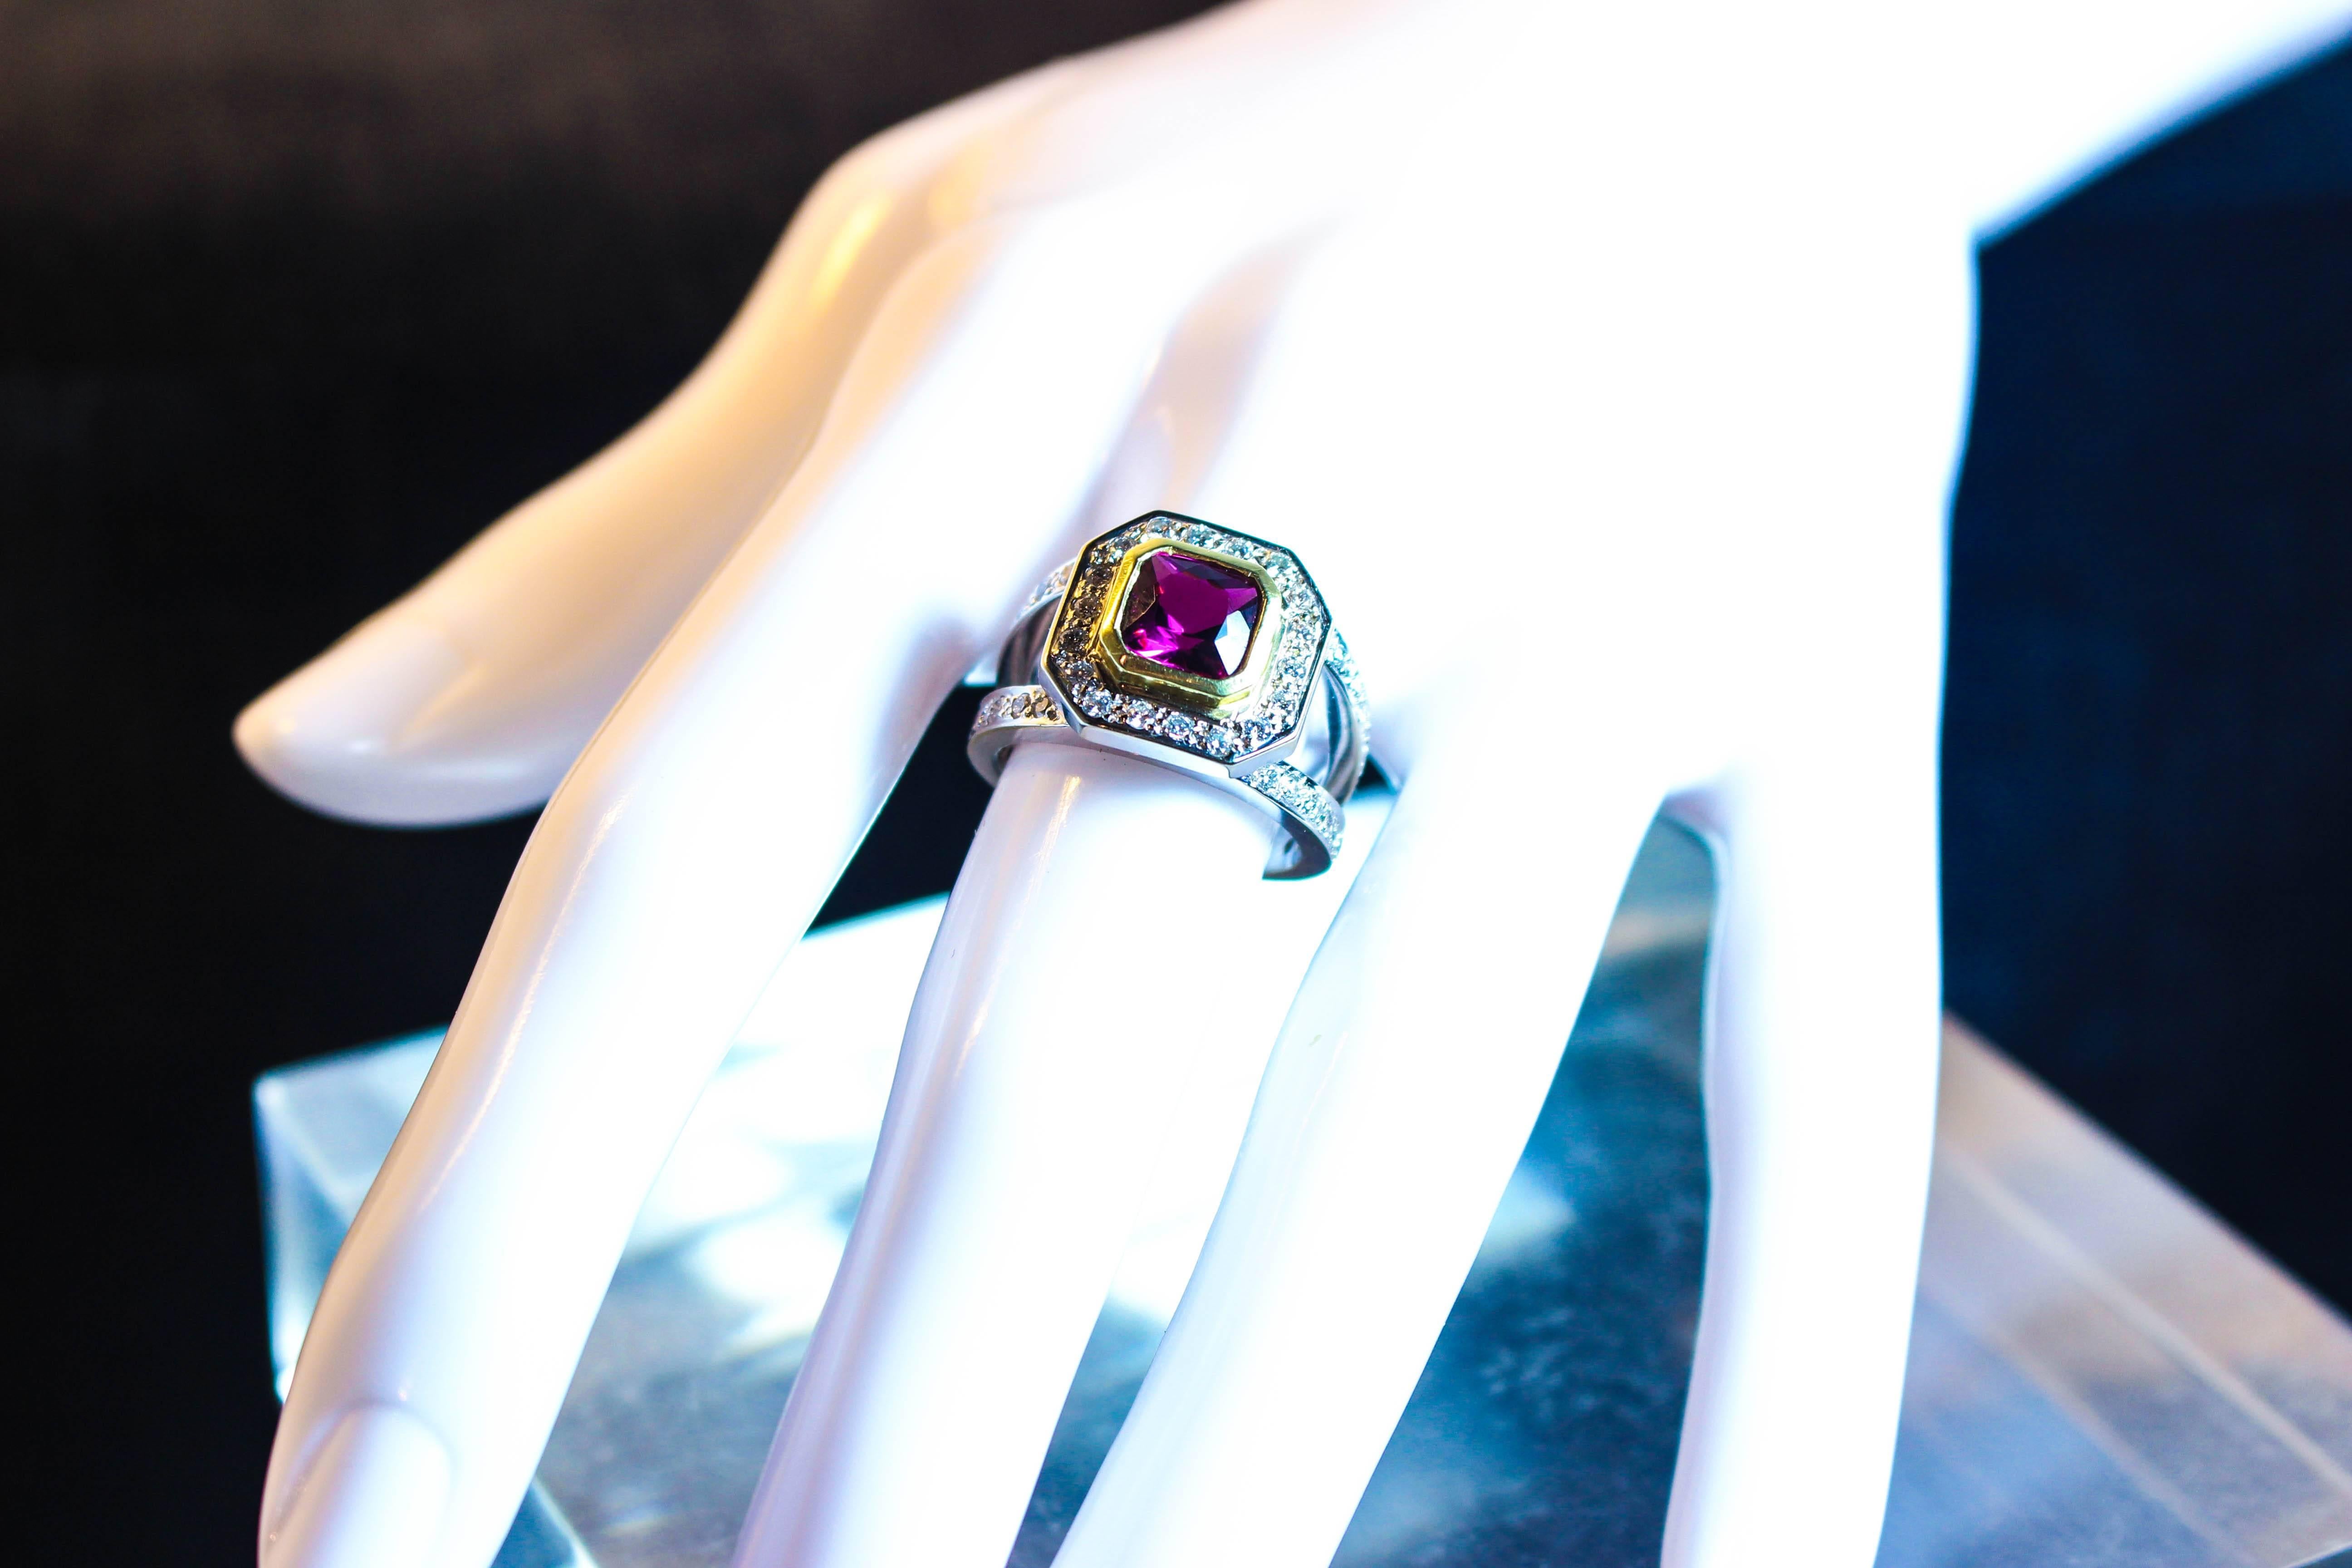 This beautiful ring features a stunning Rubelite center stone and is composed of 18kt white and yellow gold. There are pave diamonds throughout. Specs below. In excellent condition.

Please feel free to ask any questions you may have, we are happy